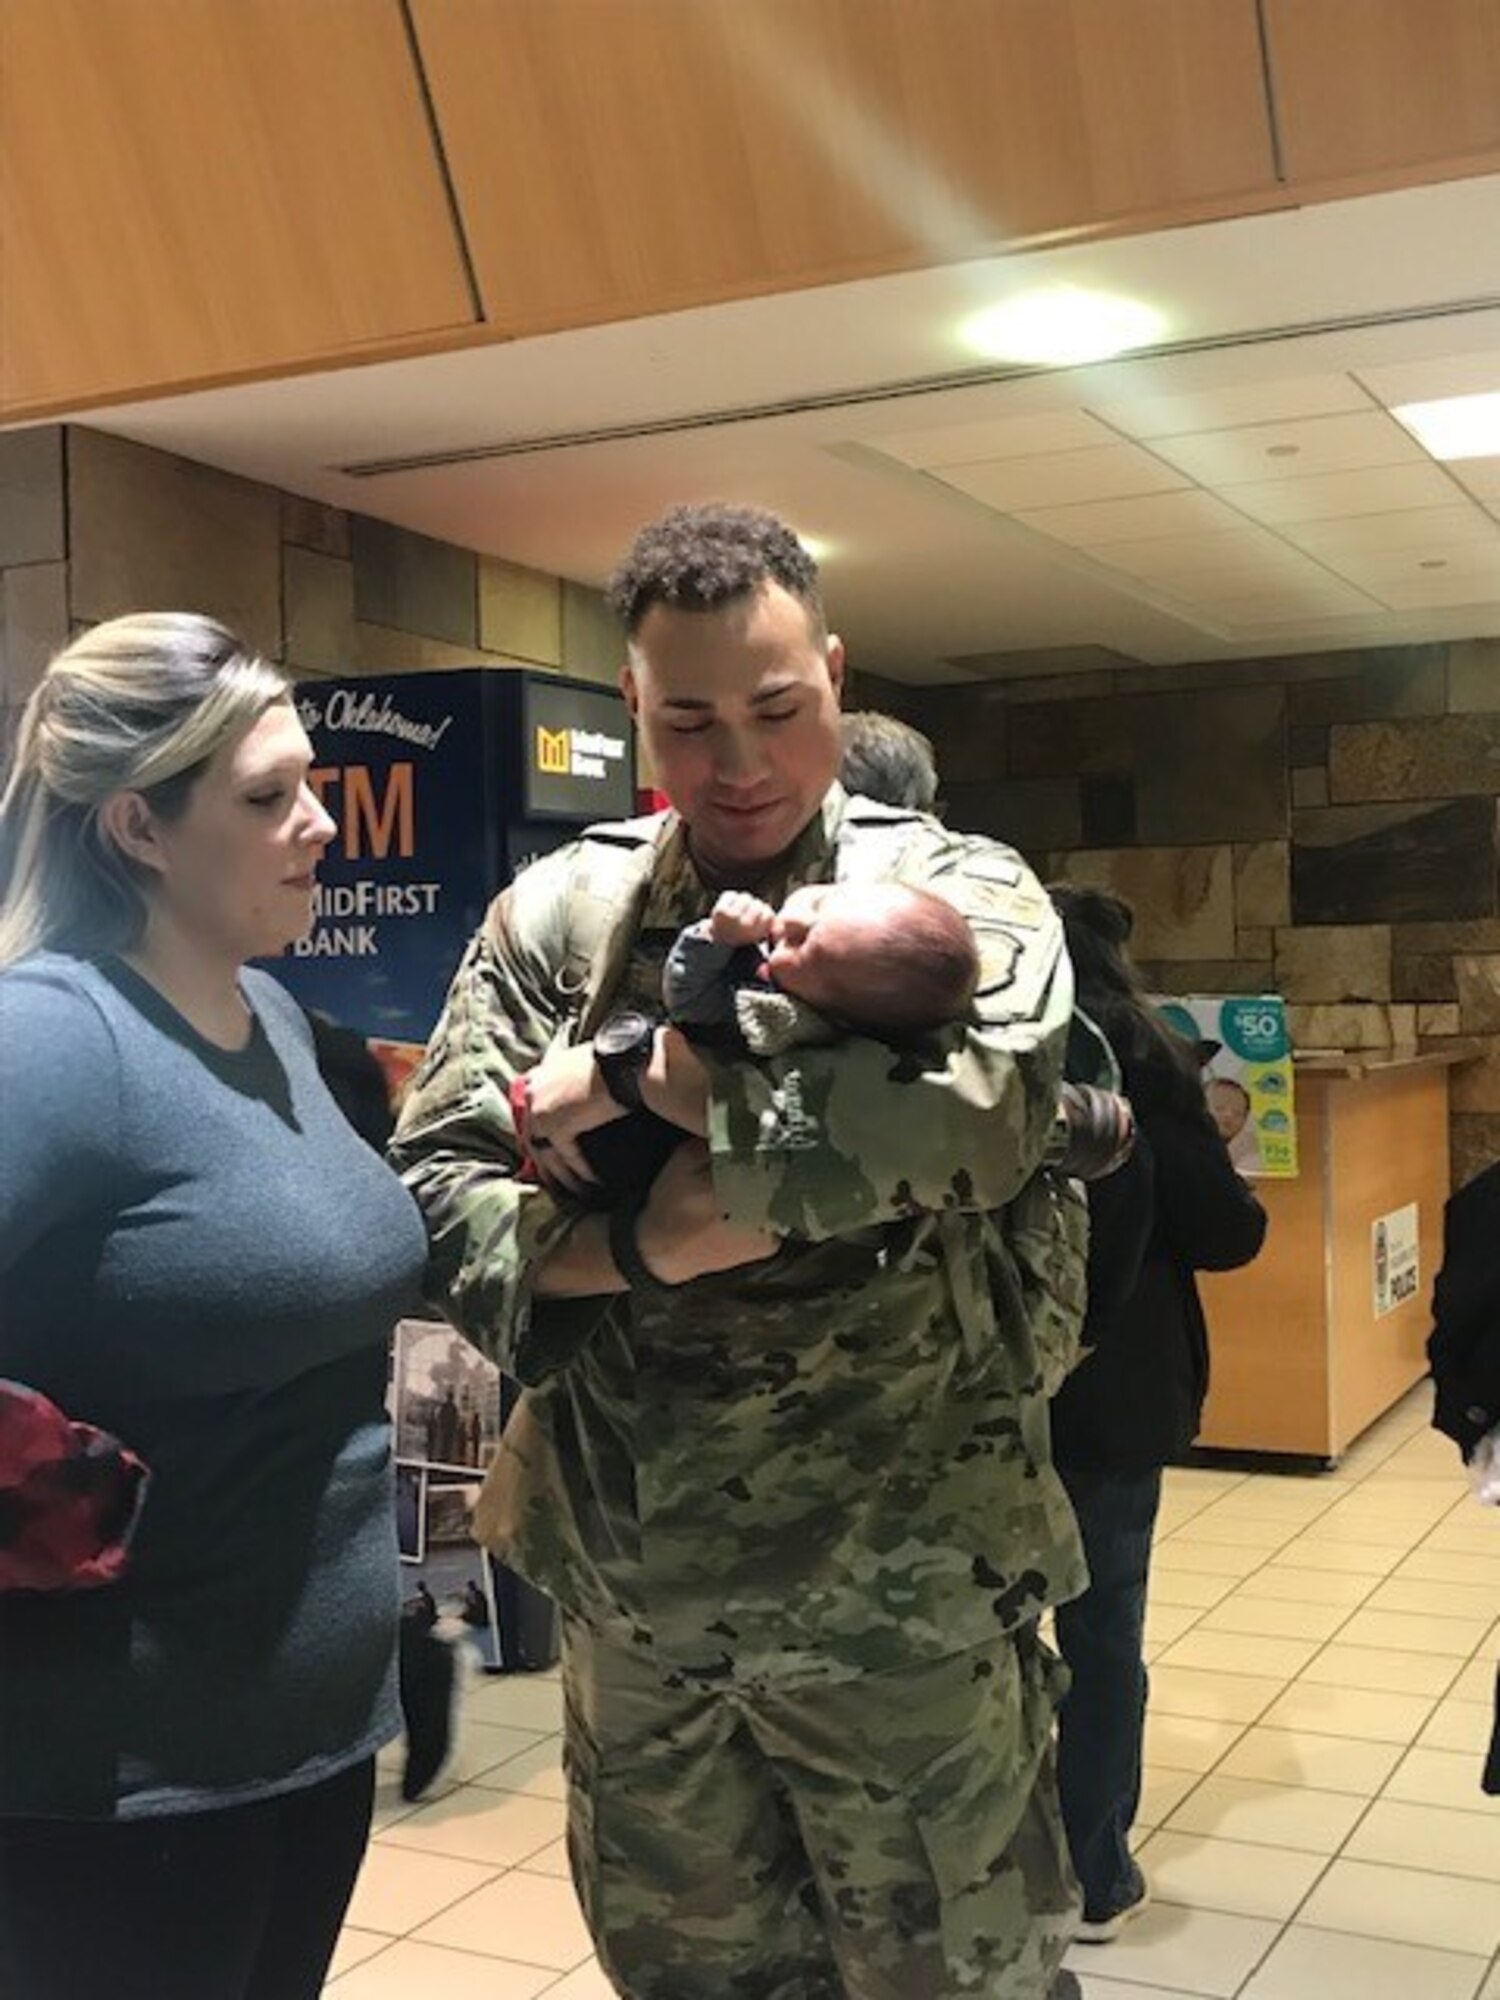 507th Security Forces Squadron defender Staff Sgt. Danny Thomas arrived at Will Rogers World Airport in Oklahoma City, Oklahoma, Jan. 23, 2019, to reunite with family and friends after a six month deployment. The Reserve Citizen Airman deployed to the 386th Air Expeditionary Wing, Southwest Asia, in support of Operation Freedom’s Sentinel as a security forces member. (U.S. Air Force photo by Master Sgt. Samantha Judge)